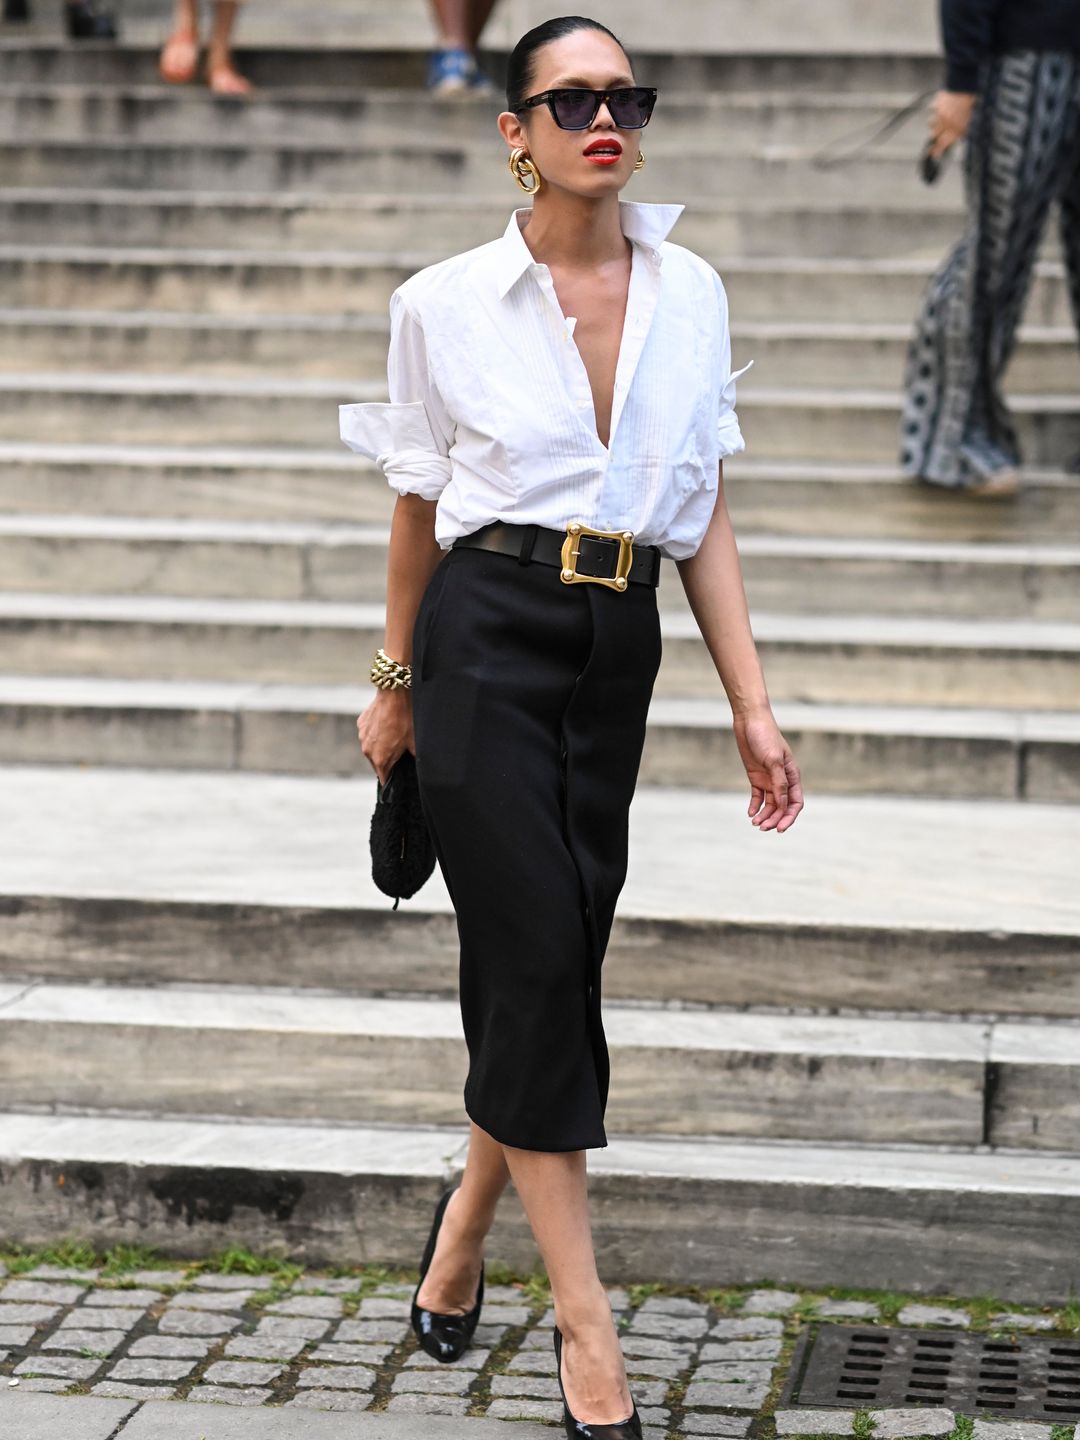 A fashion week guest rocks a white shirt with a form-fitting skirt 